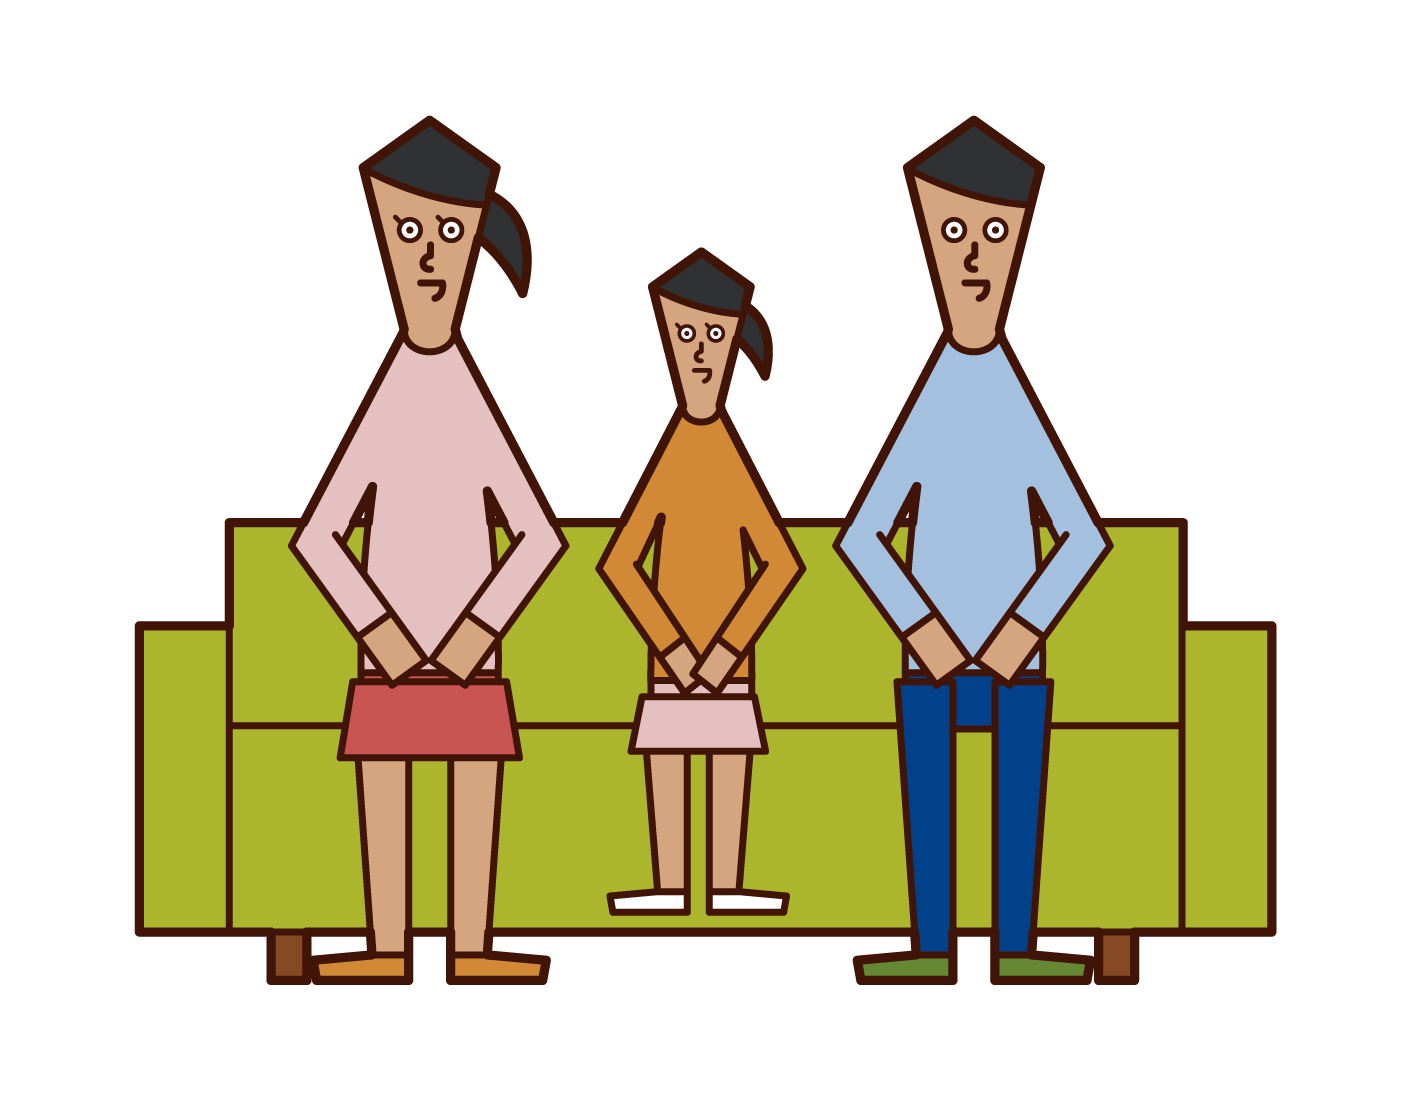 Illustration of a family of three